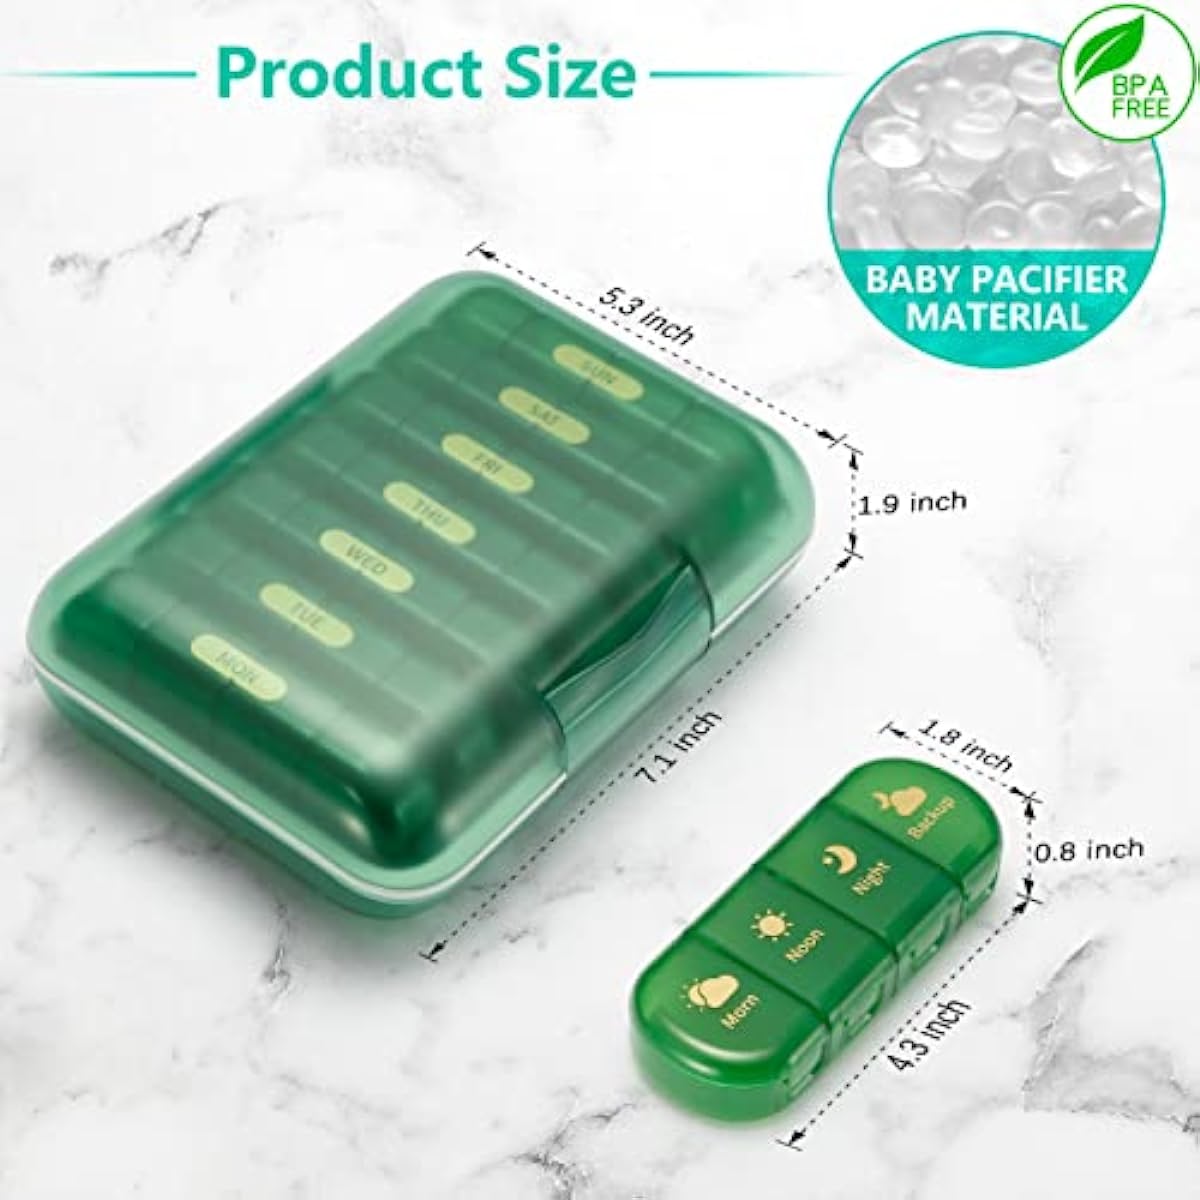 Large Weekly Pill Organizer 4 Times a Day - 7 Day Pill Box - Big Compartment Pill Portable Case - Monthly Medication Container - Also 4 Week 28 Day Removable Dispenser for Medication and Vitamin